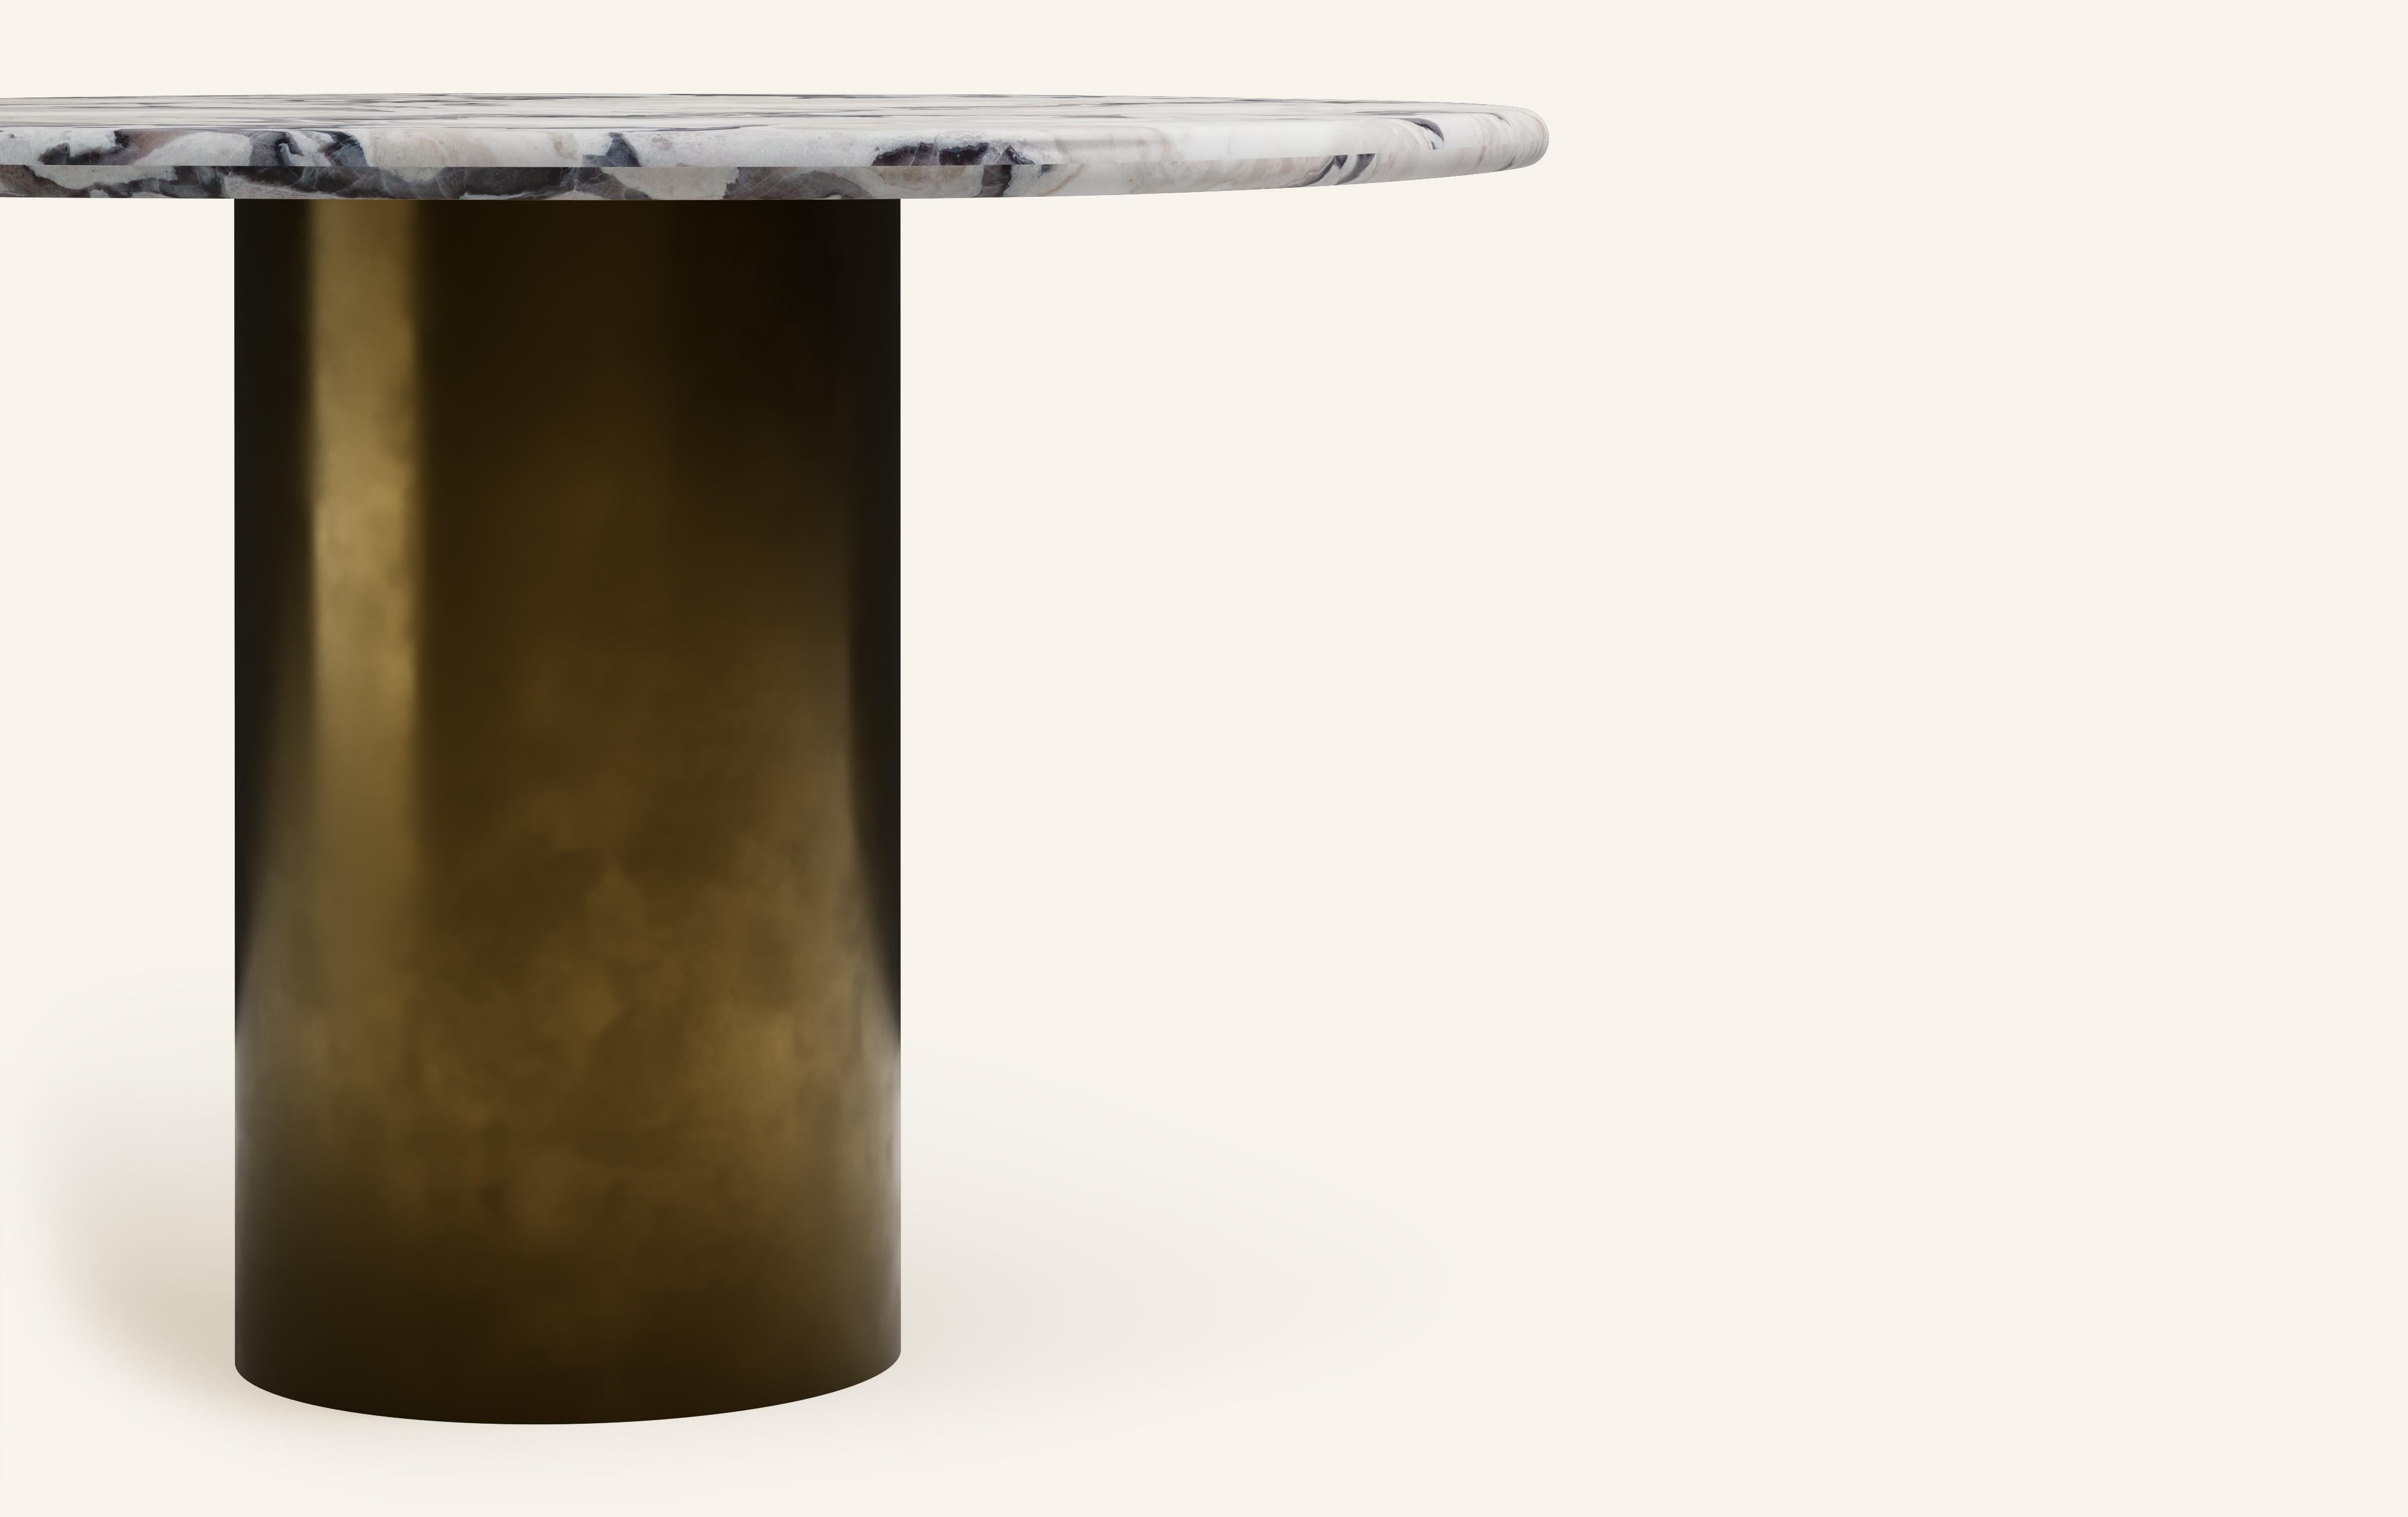 Organic Modern FORM(LA) Lago Round Dining Table 36”L x 36”W x 30”H Oyster Marble & Bronze For Sale